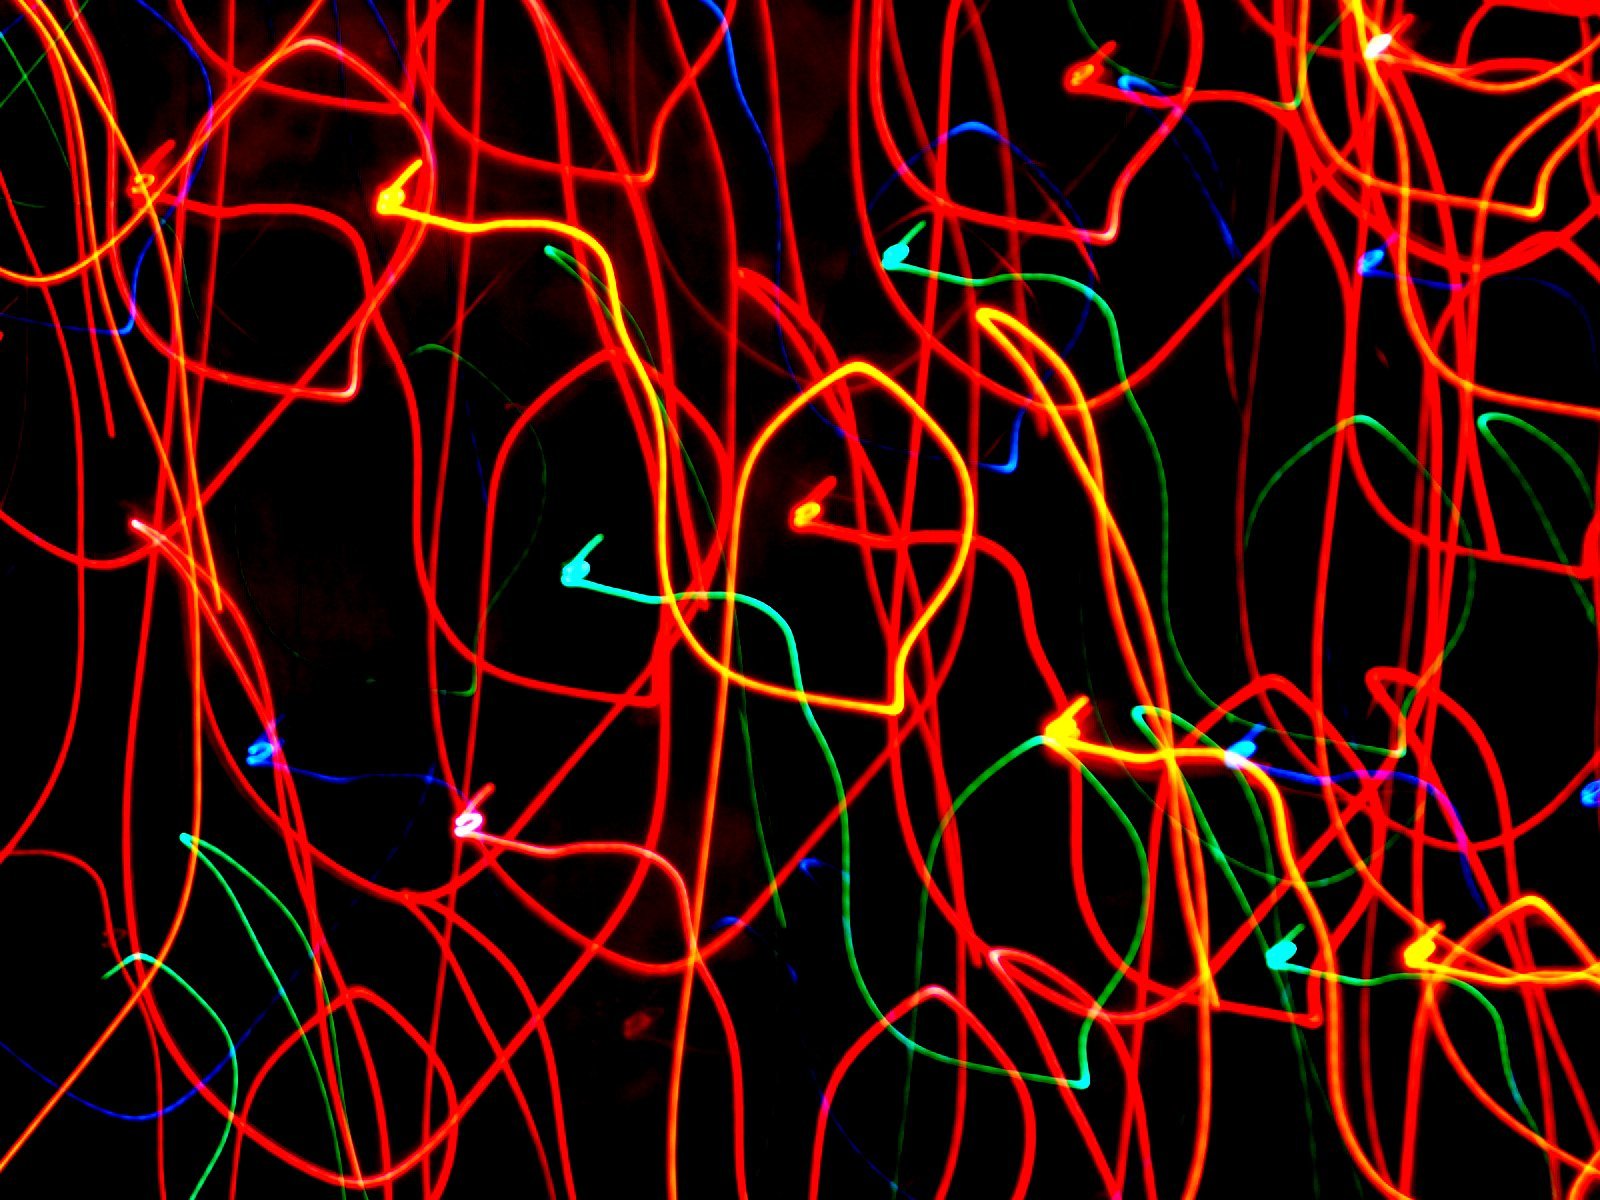 an image of a close up view of lights